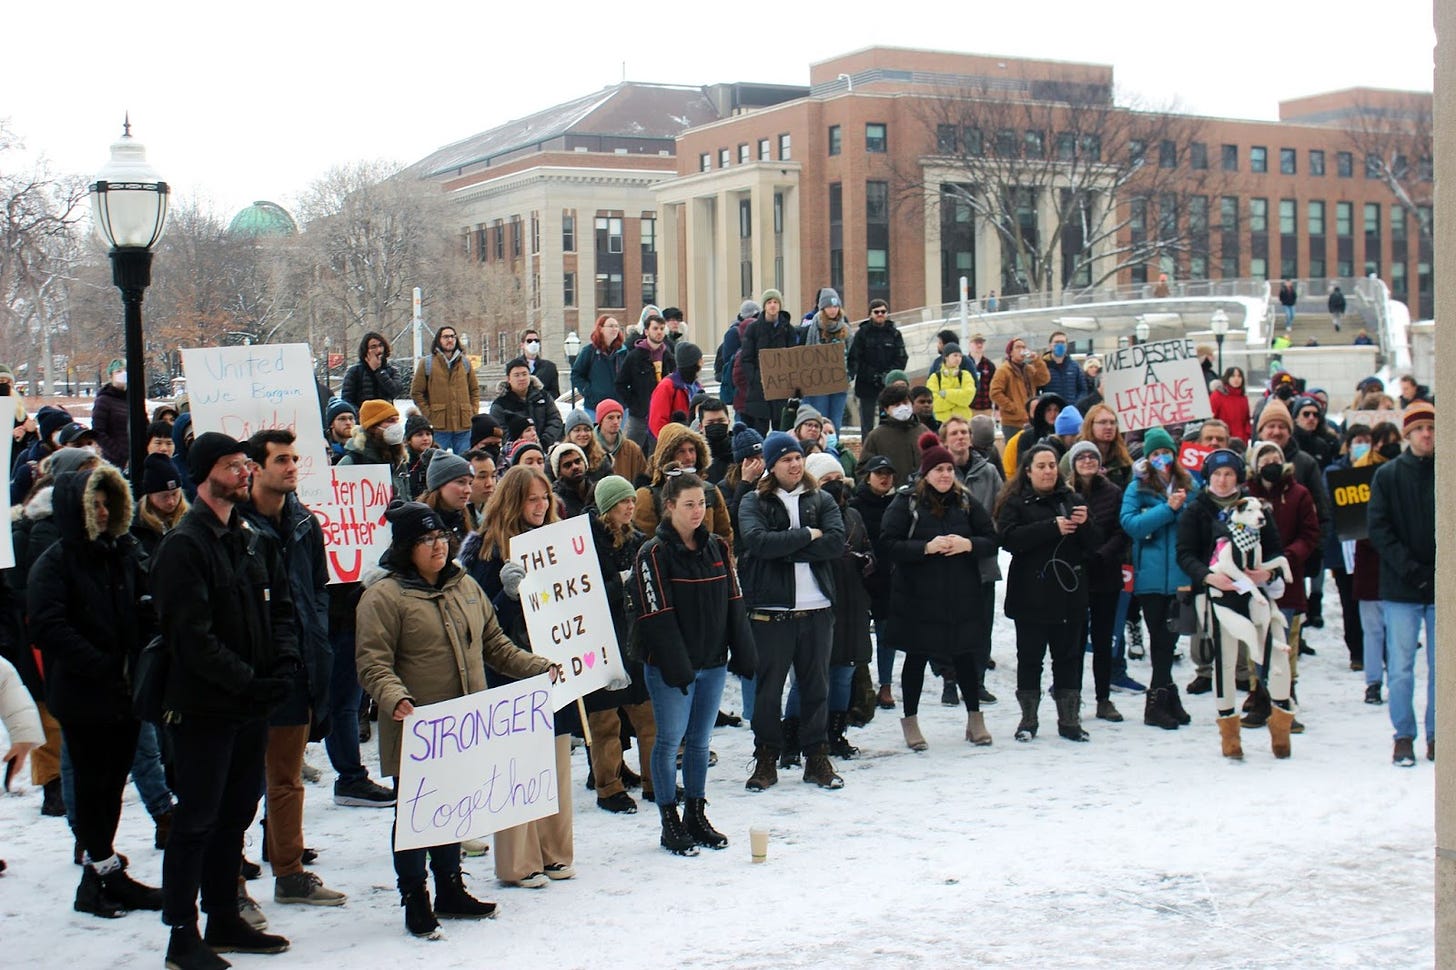 a crowd of people wearing winter garb and standing in the snow on campus in front of big brick buildings hold signs reading "we deserve a living wage," "the U works cuz we do!" and "stronger together"